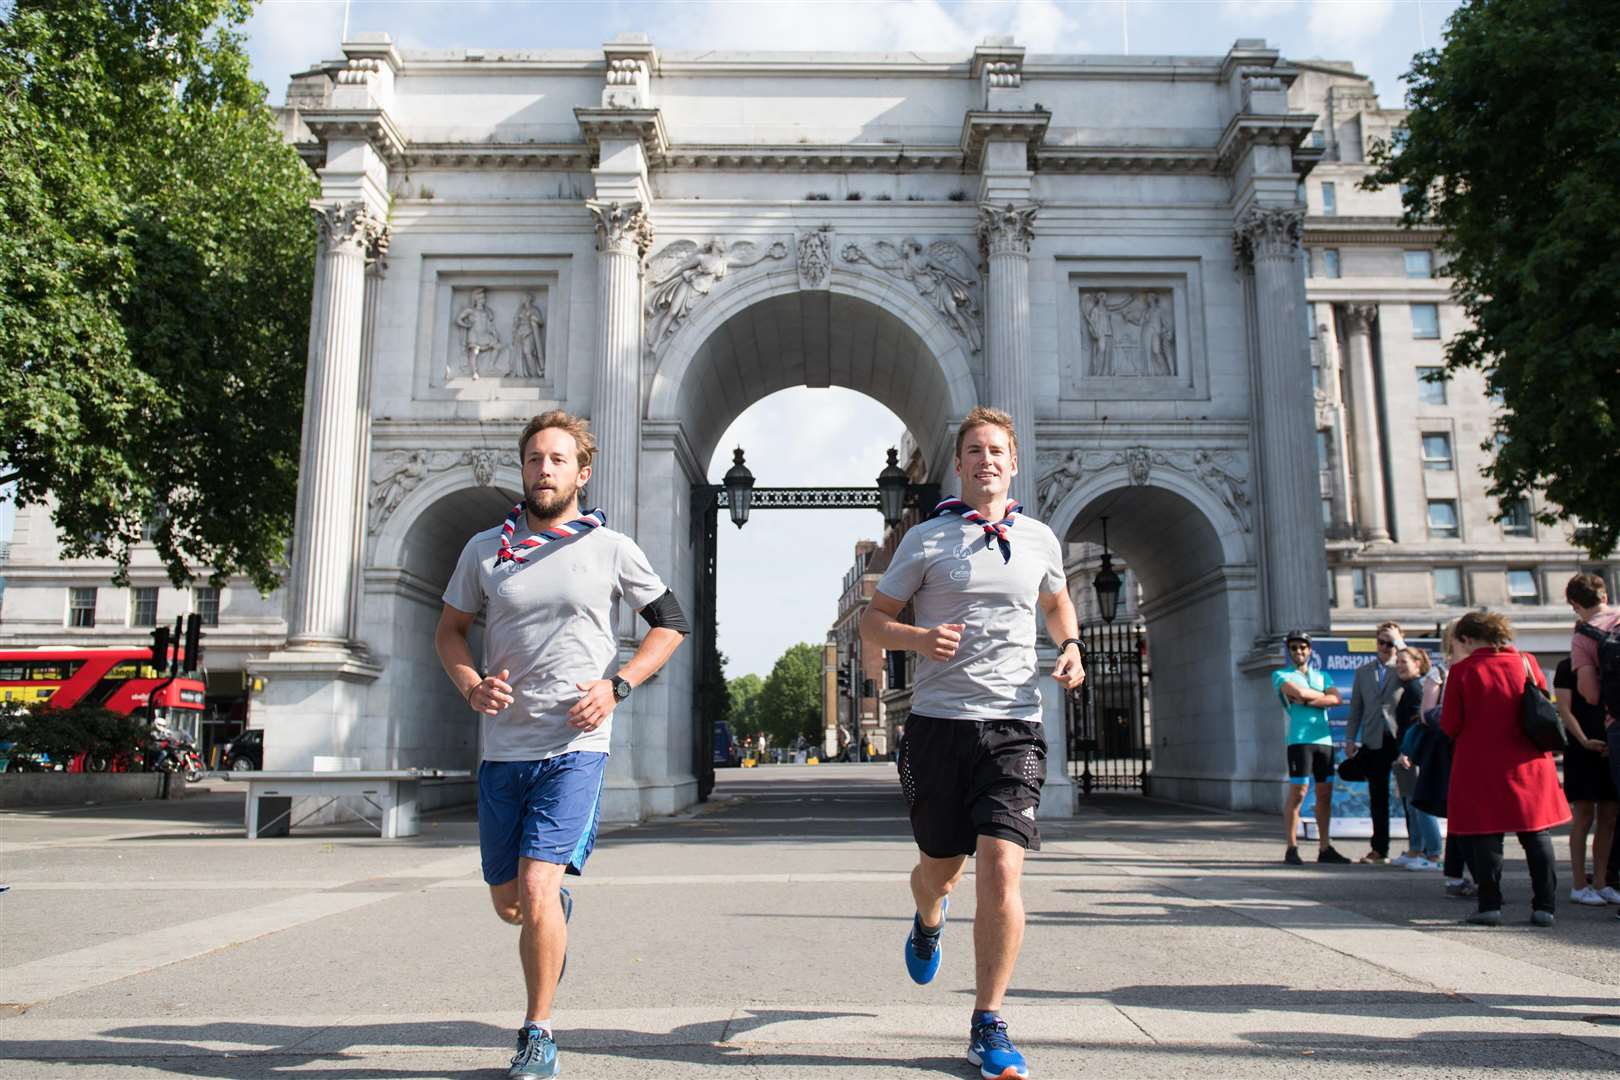 Robert McArthur and Leopold van Lynden are running through Kent as part of their Arch to Arctic challenge (2574767)